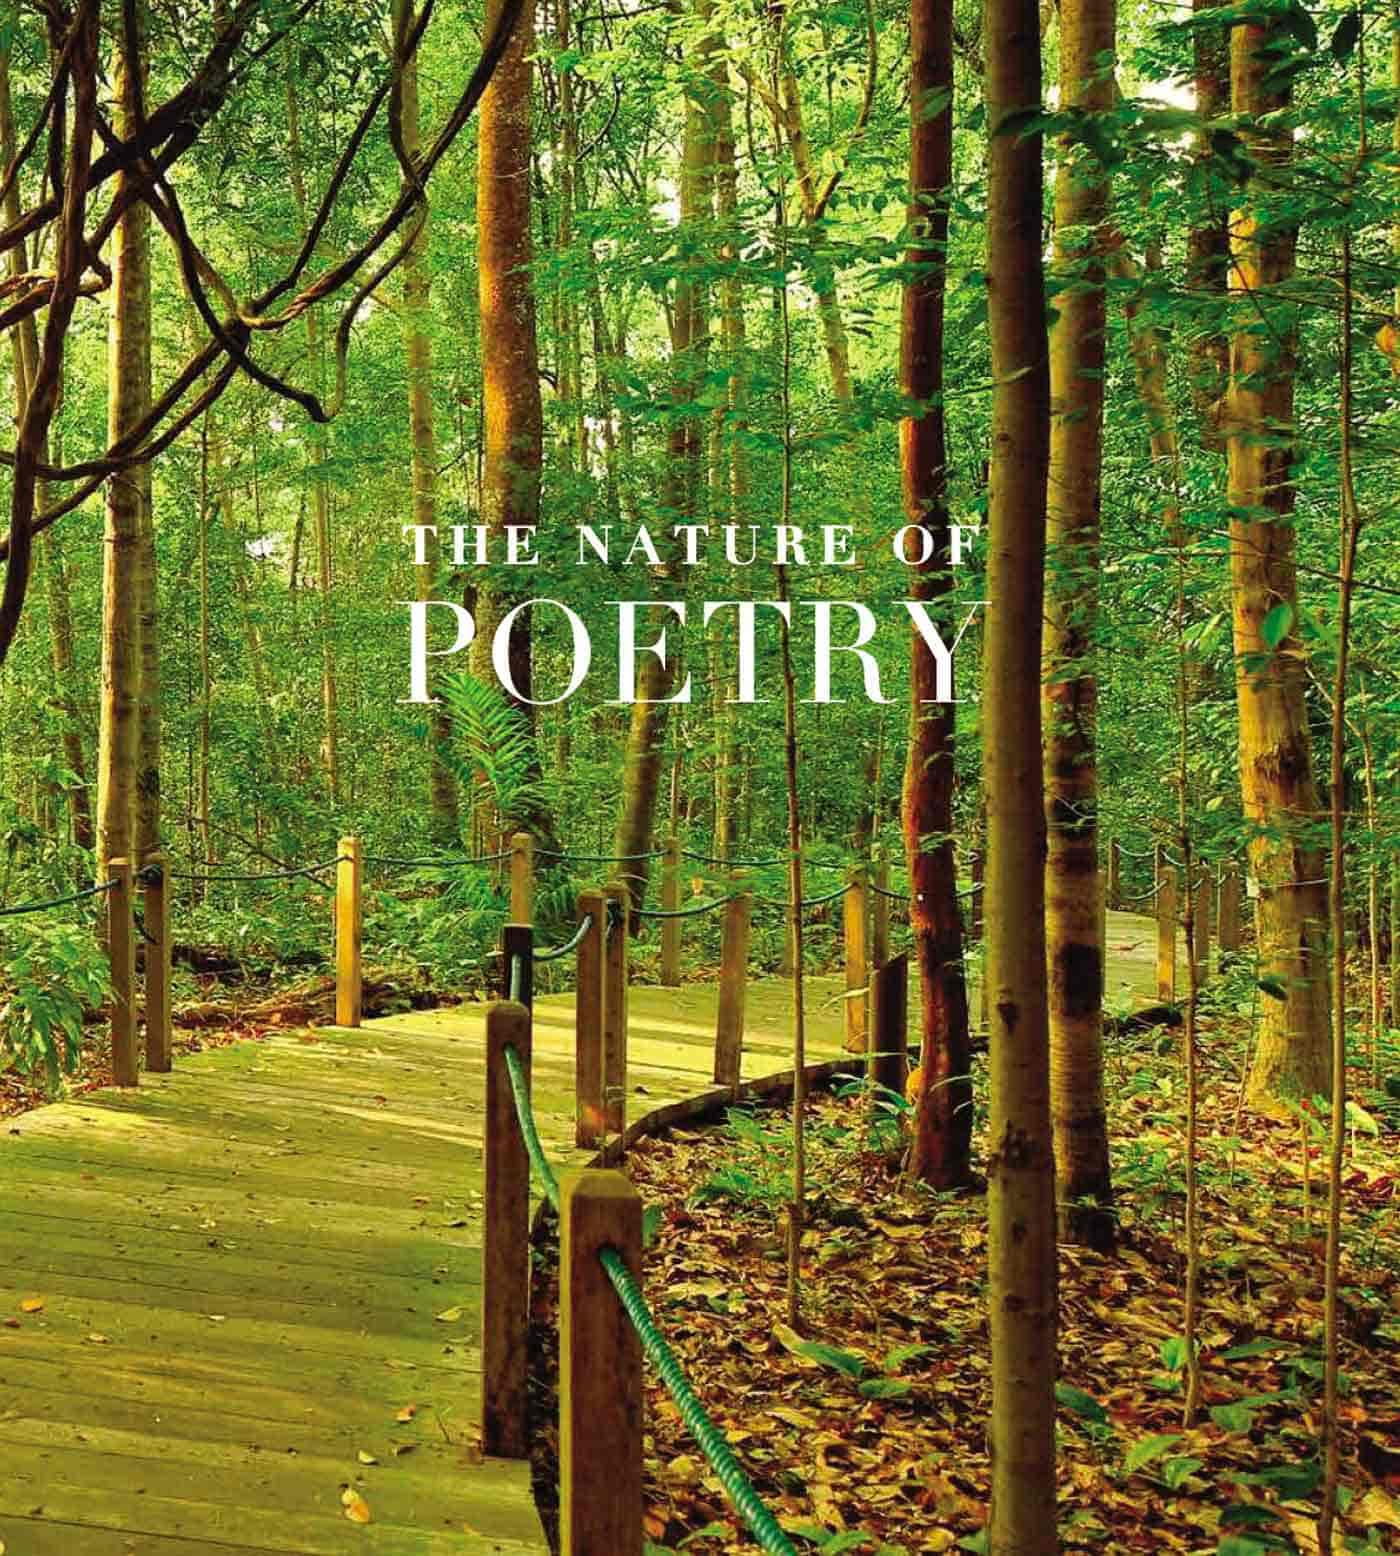 The Nature of Poetry